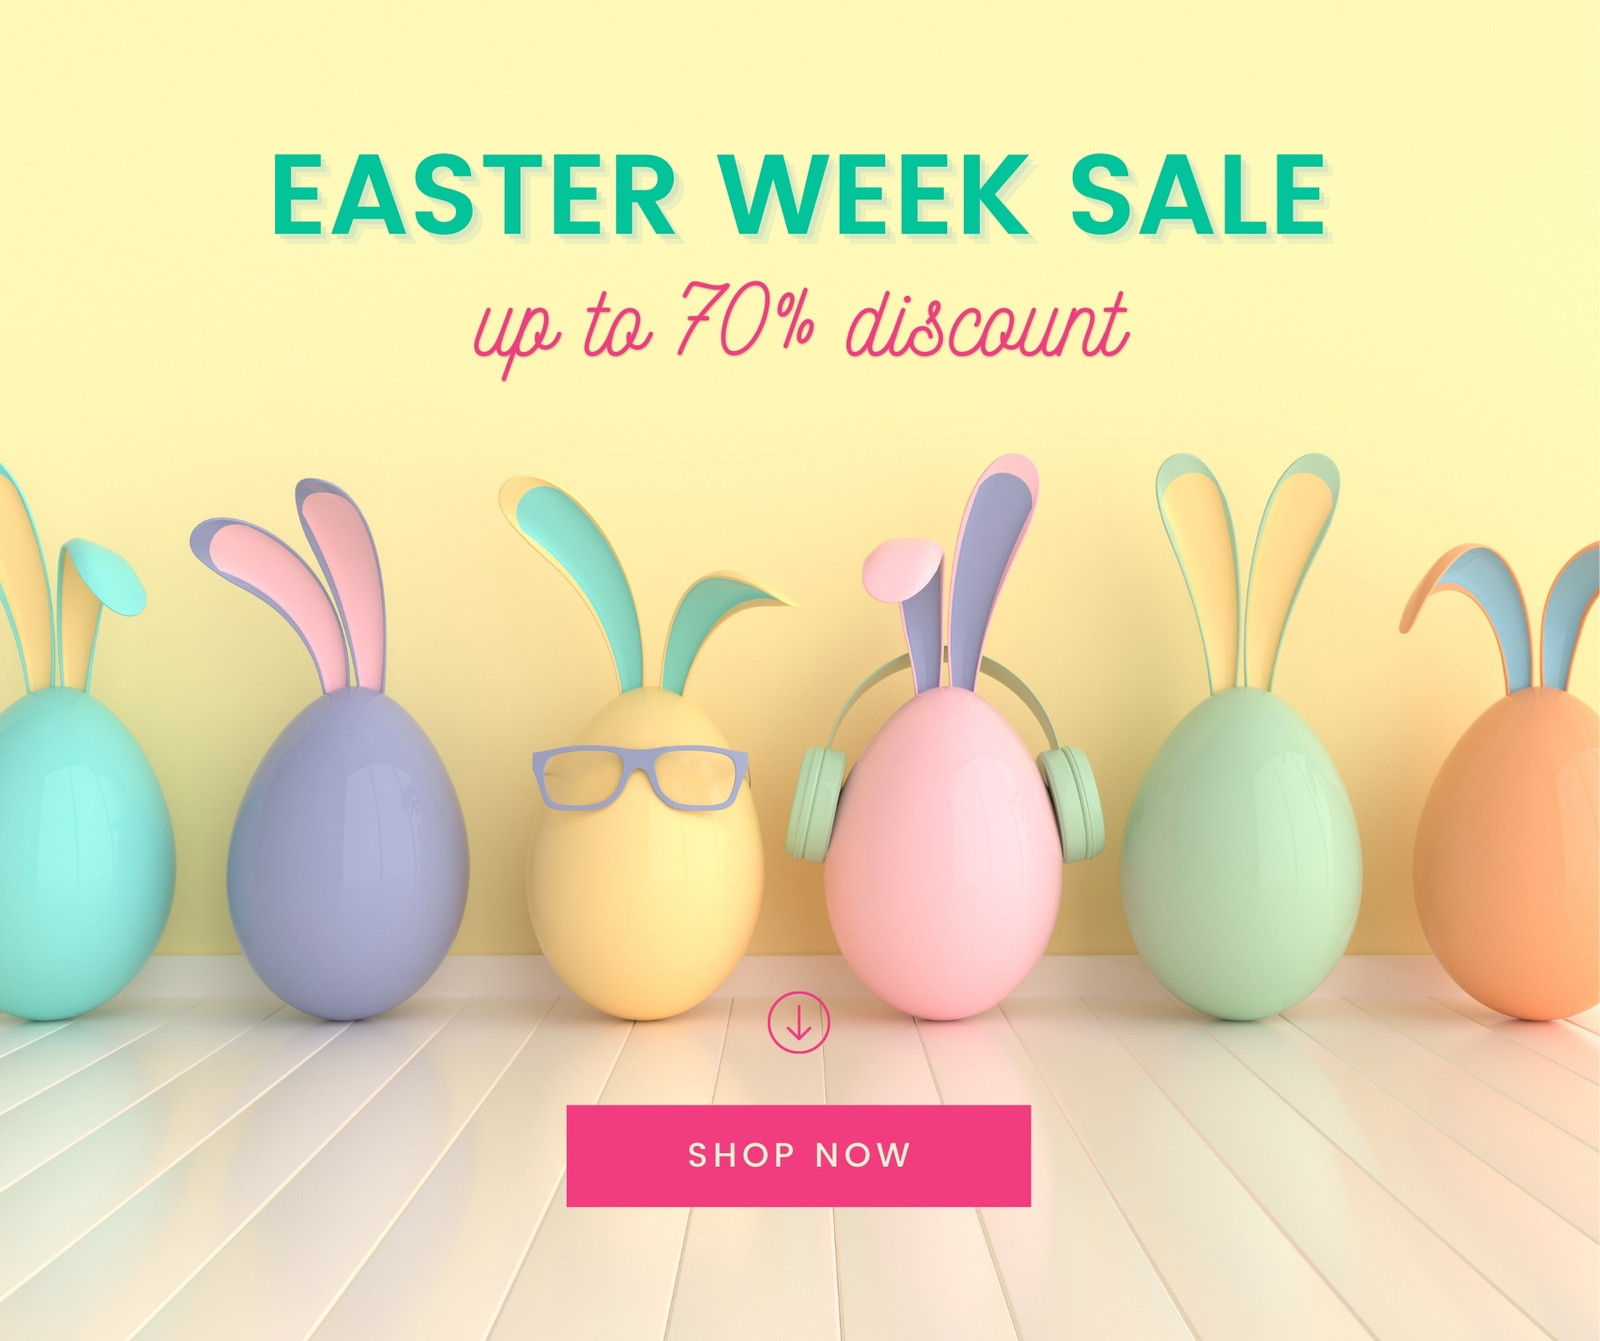 Page 21 - Free and customizable easter egg templates